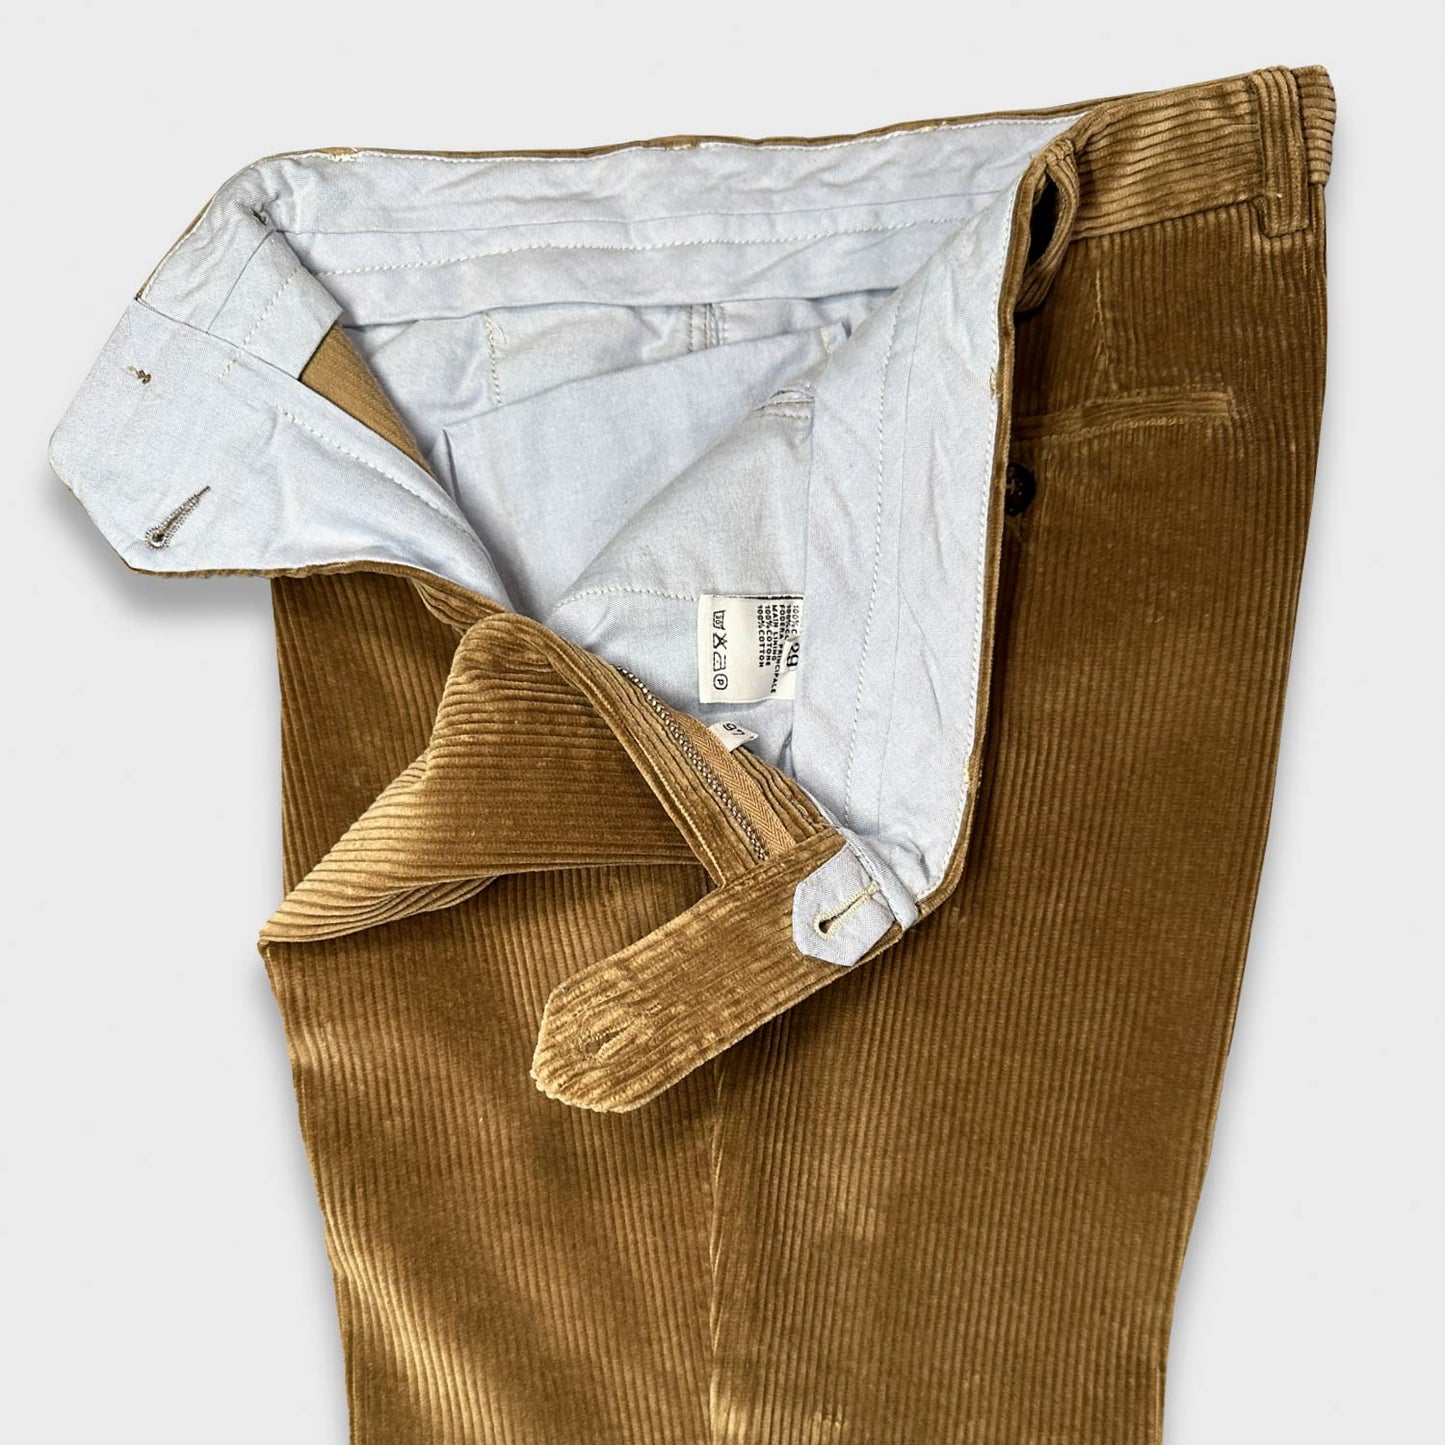 Honey Yellow Corduroy Cotton Tailoring Pants. Men's cotton corduroy trousers, Rota since 1962 made in Italy tailored trousers, soft and warm fabric made by Brisbane Moss, single pleats, high rise classic fit, honey yellow color.